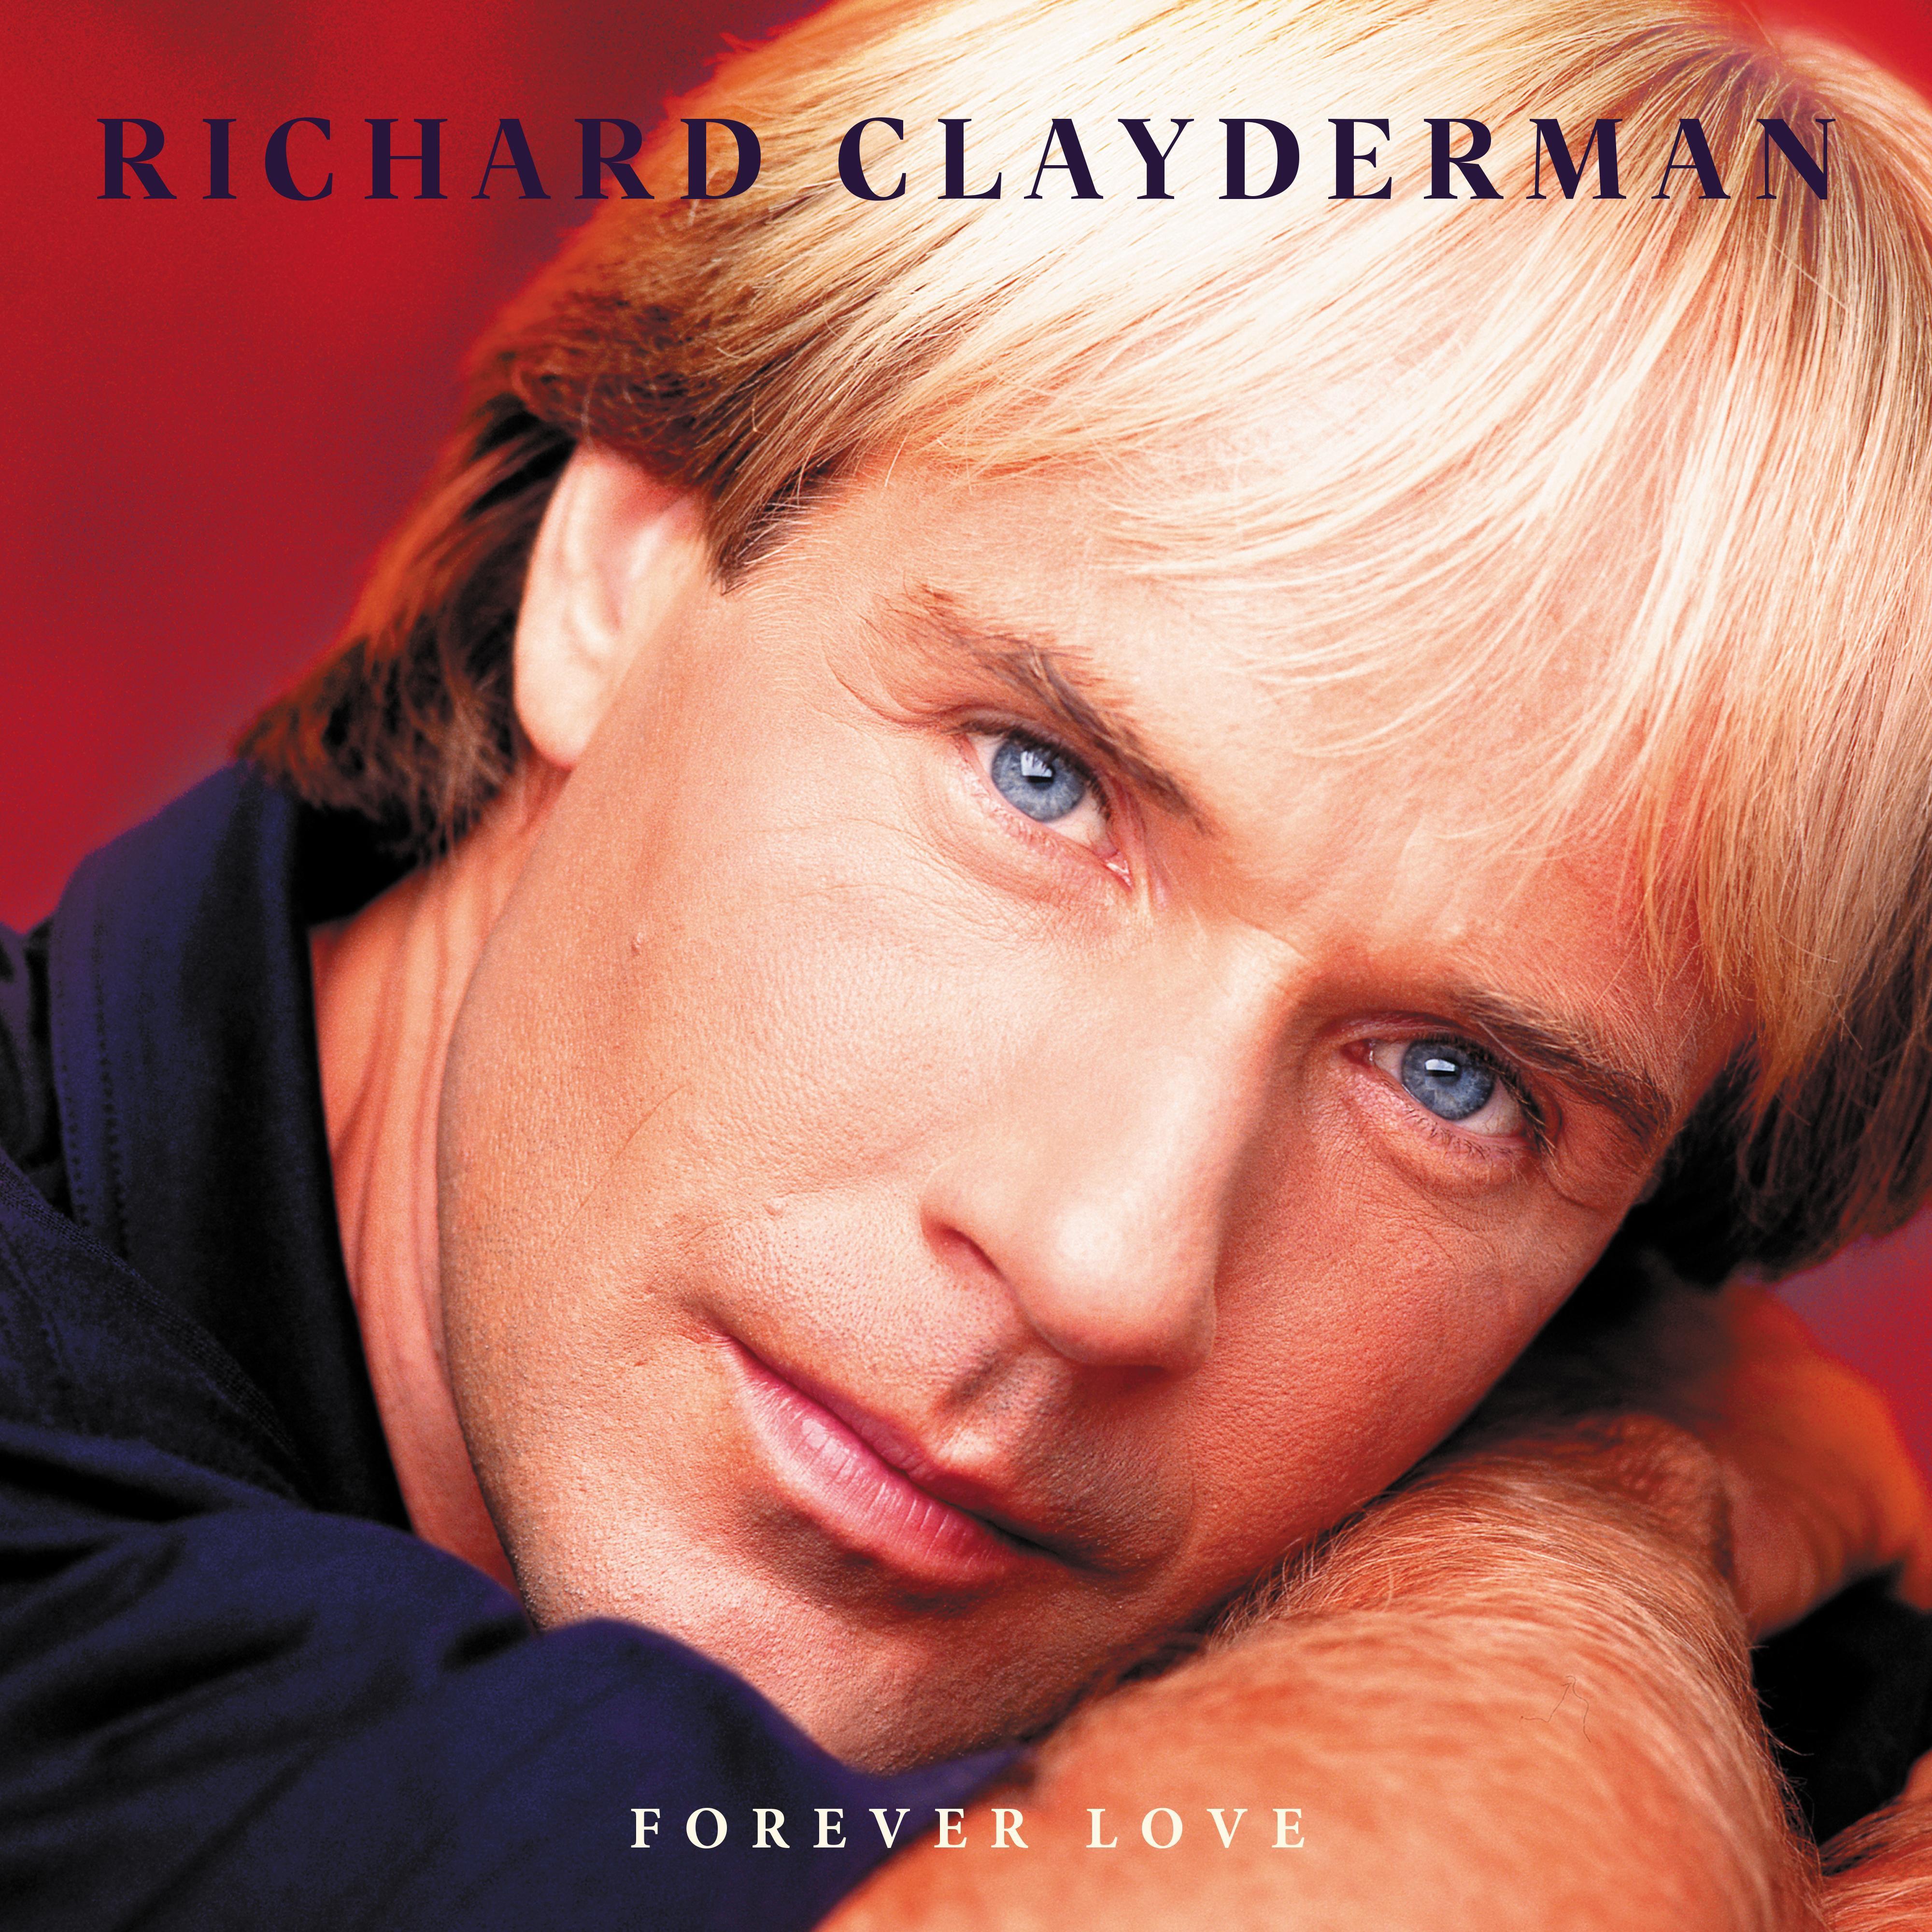 Richard Clayderman - I Just Called to Say I Love You